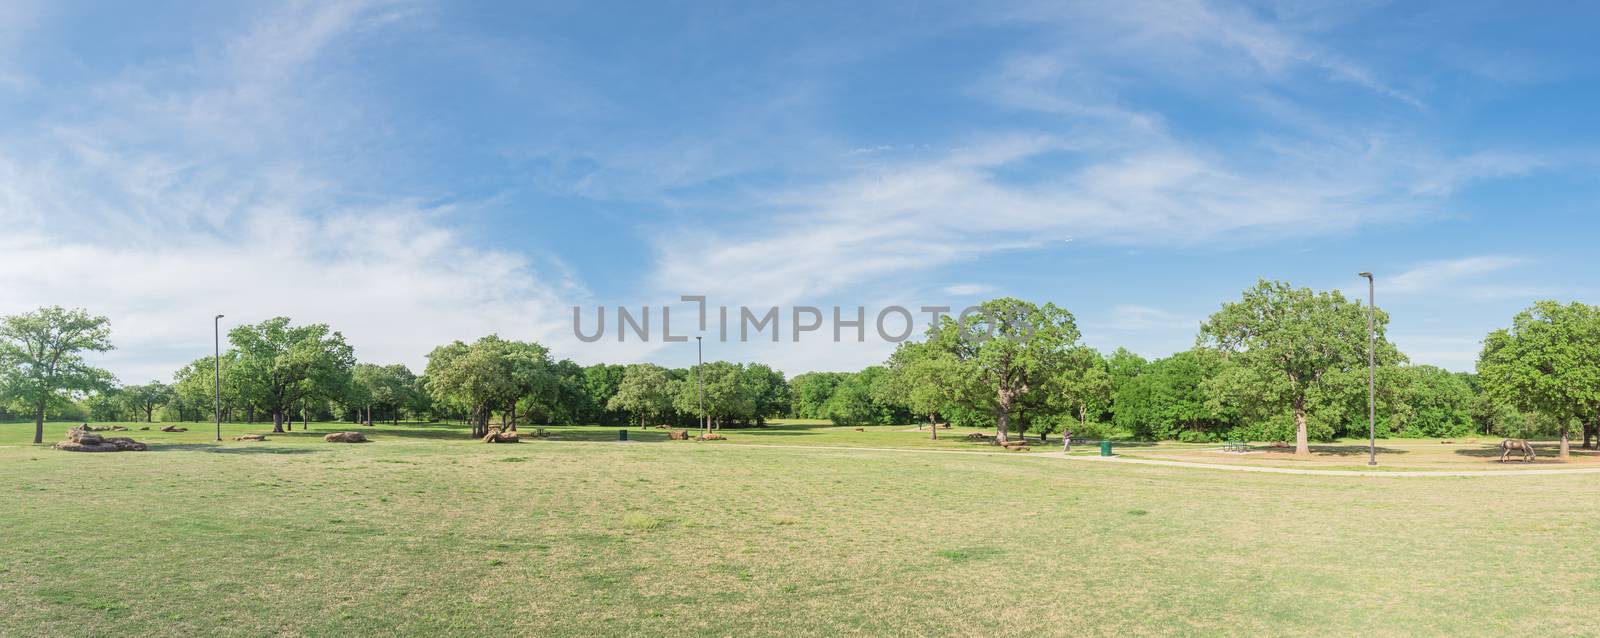 Panoramic view a natural urban park with grass lawn and tree lus by trongnguyen